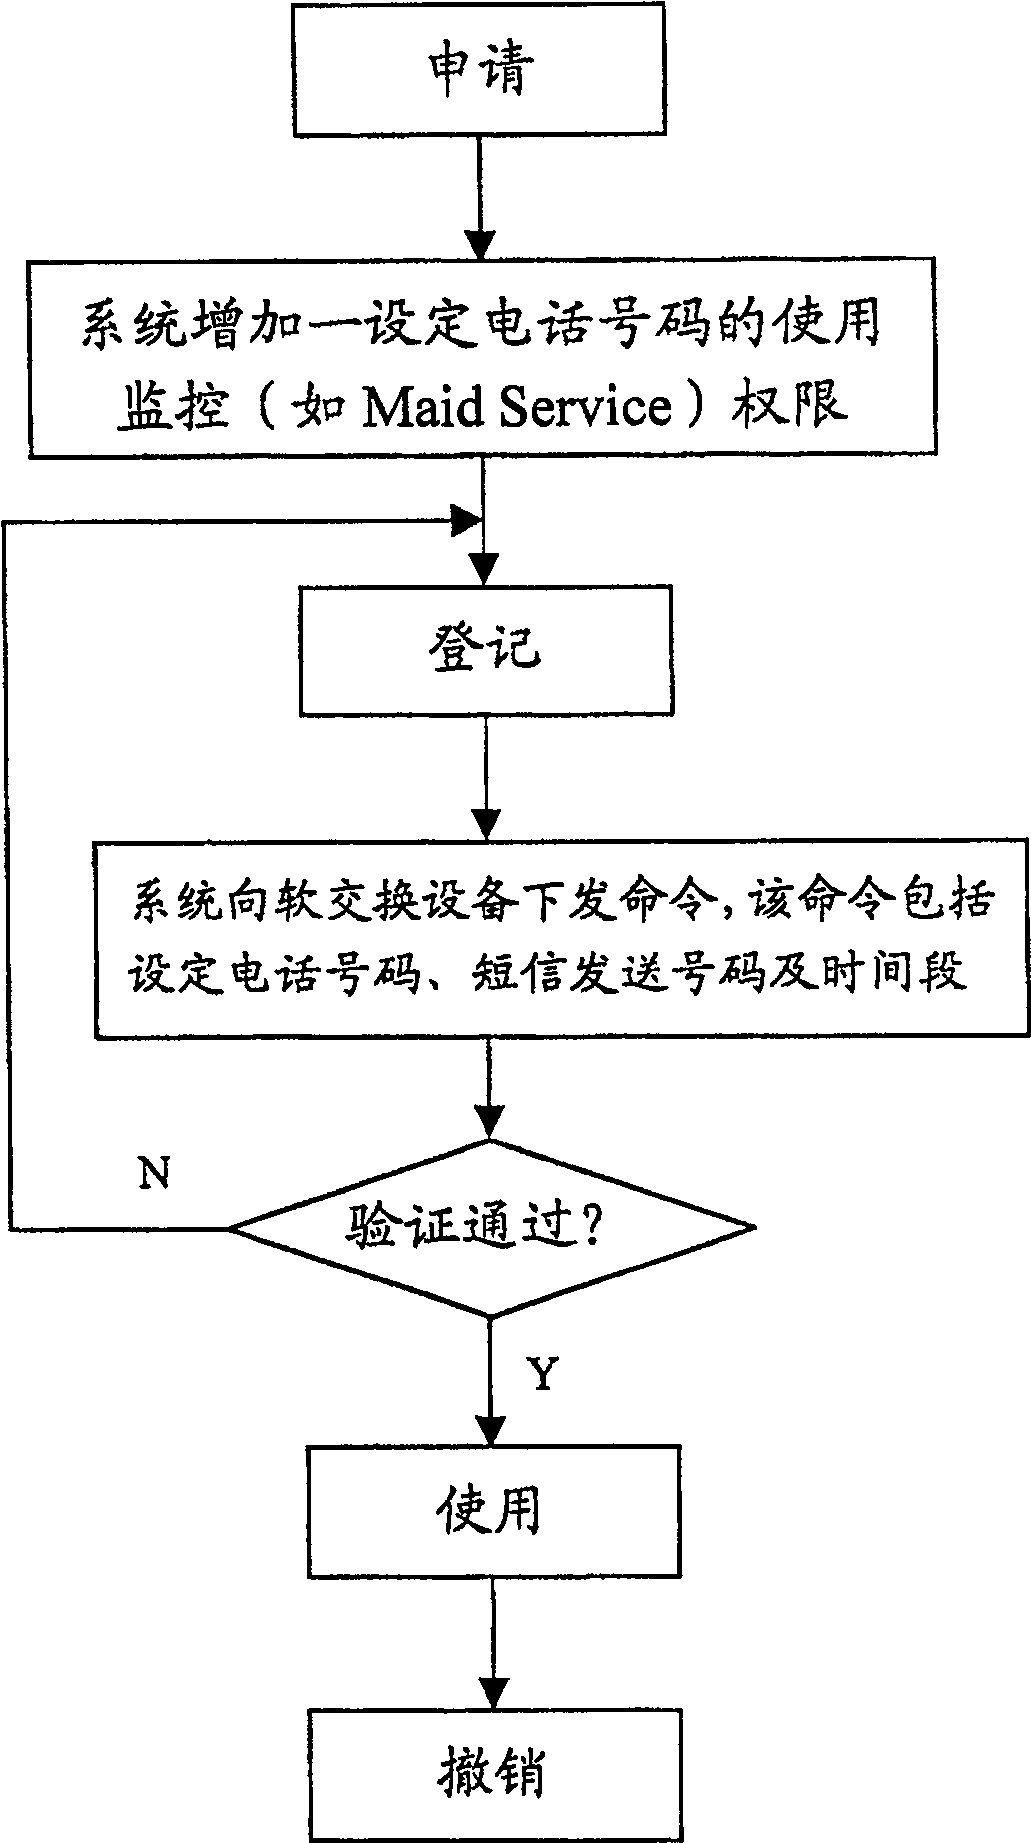 Method for monitoring telephone service condition